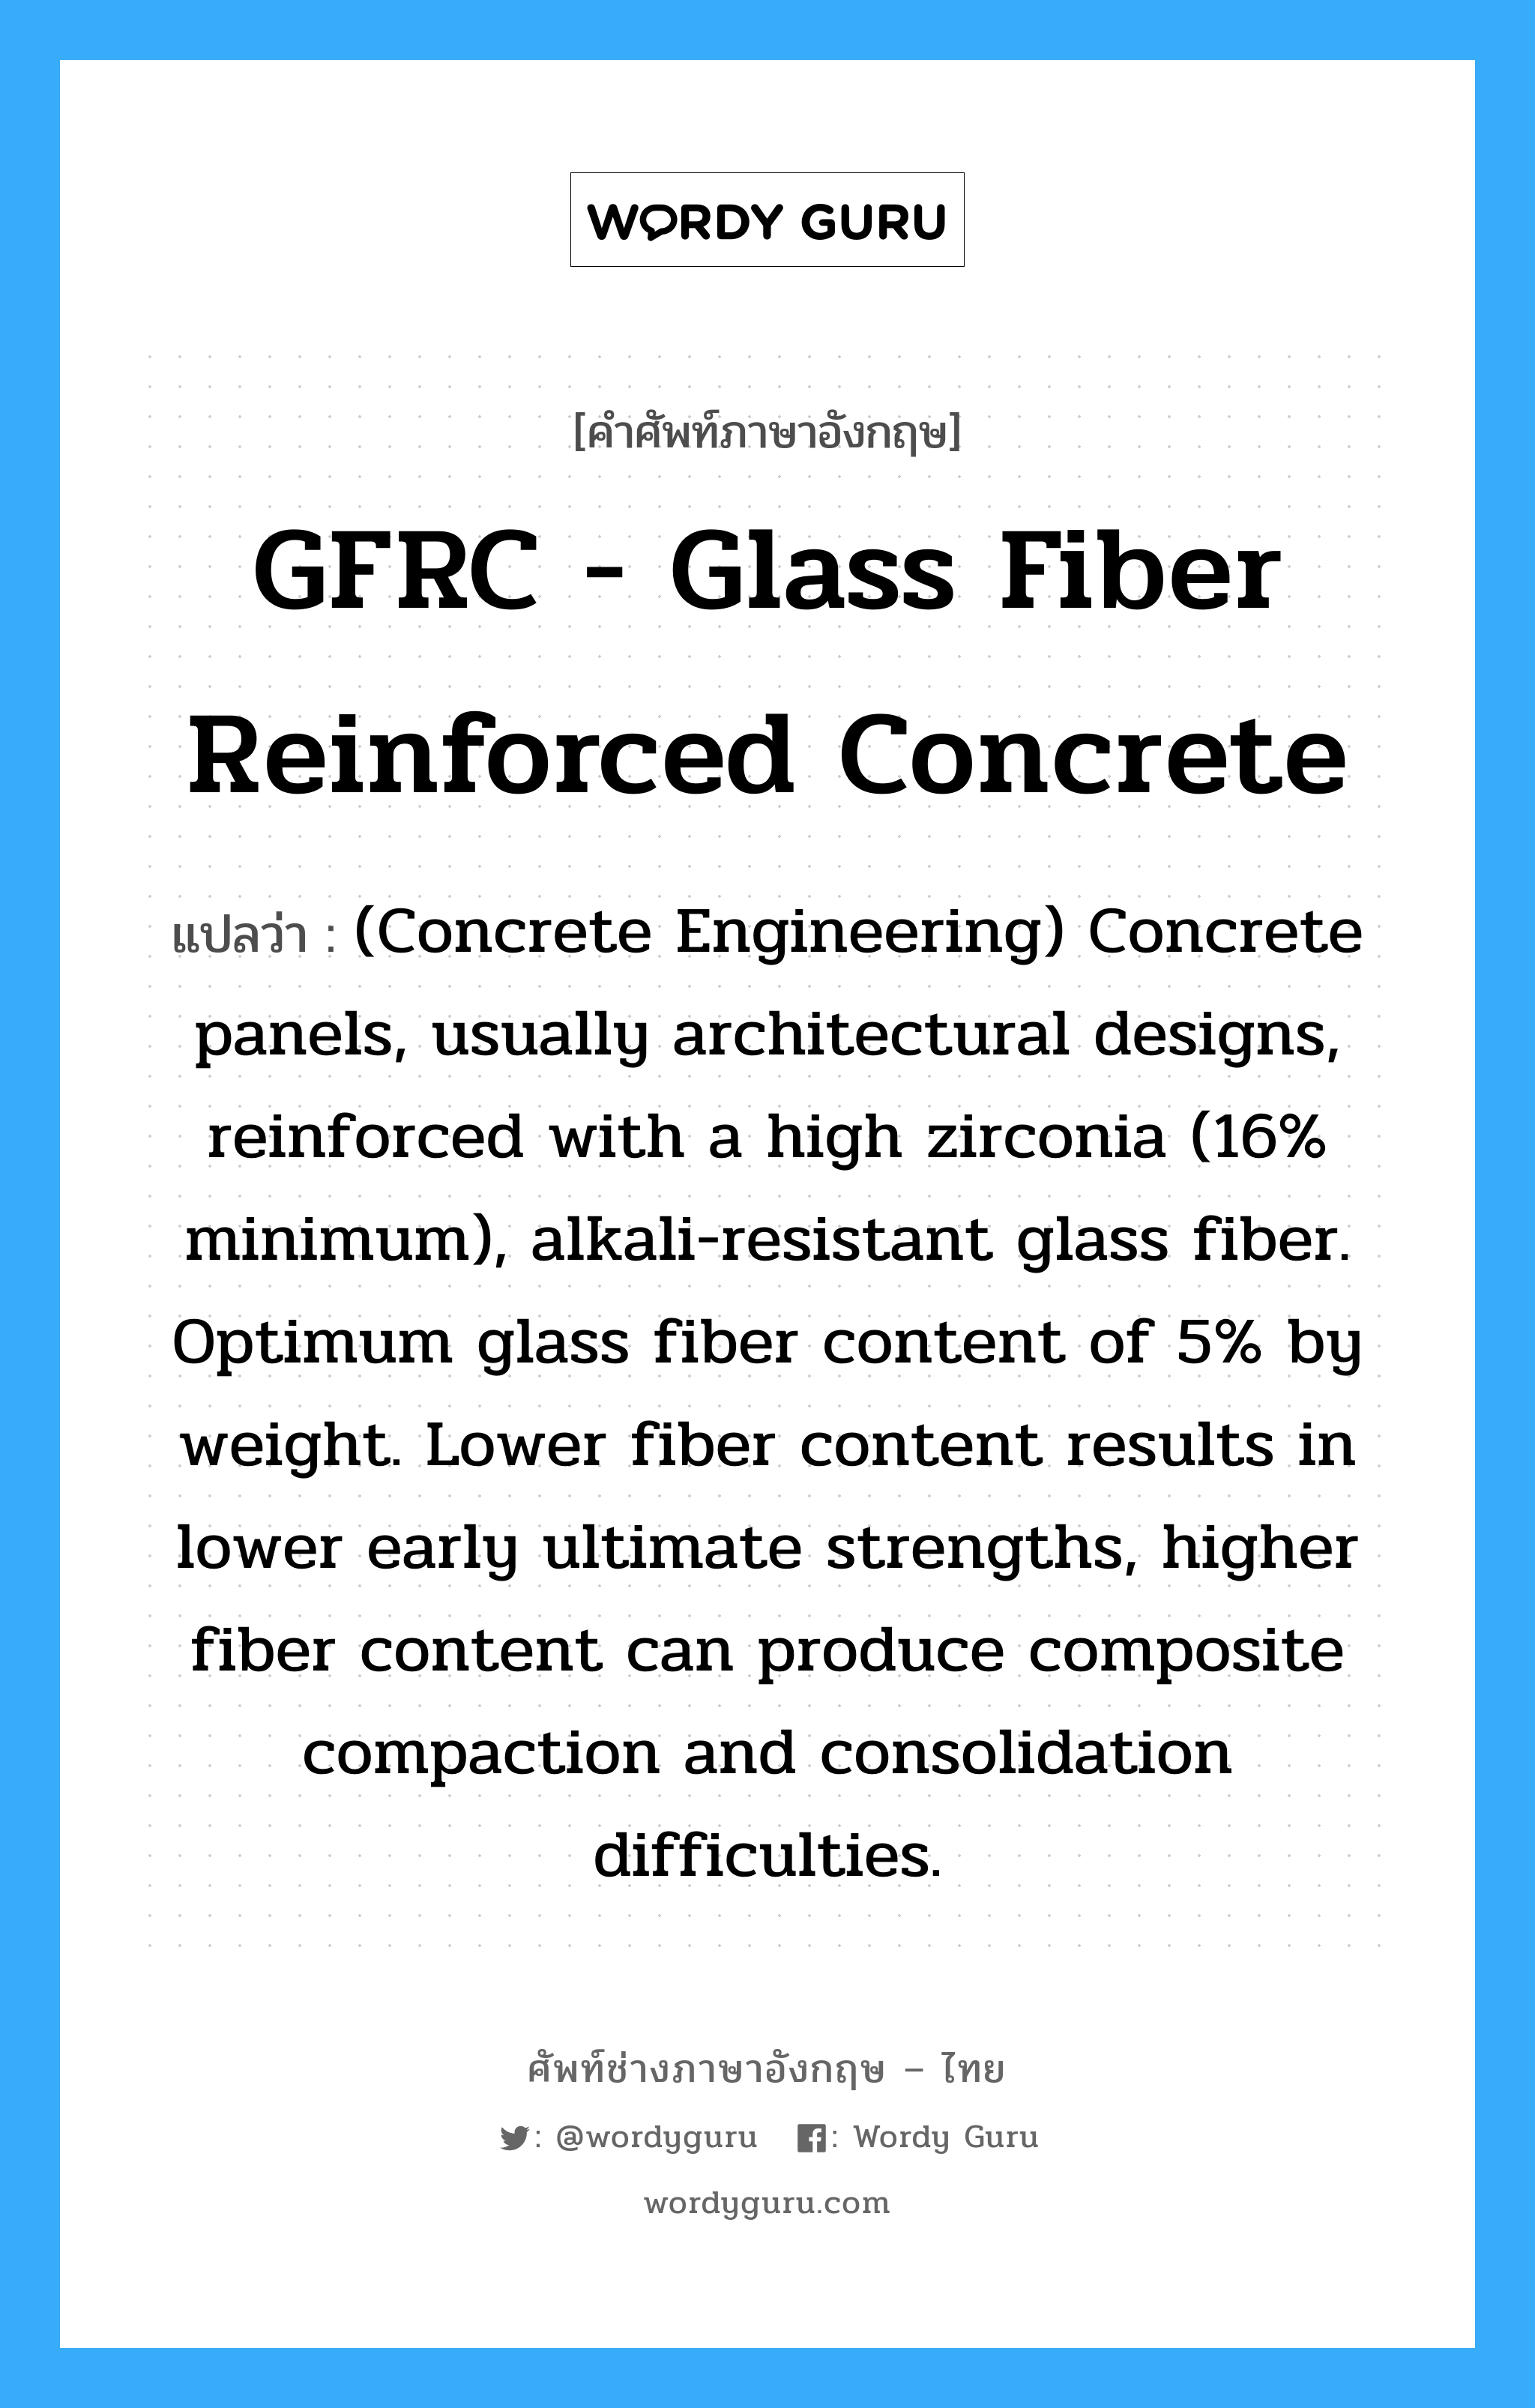 GFRC - Glass Fiber Reinforced Concrete แปลว่า?, คำศัพท์ช่างภาษาอังกฤษ - ไทย GFRC - Glass Fiber Reinforced Concrete คำศัพท์ภาษาอังกฤษ GFRC - Glass Fiber Reinforced Concrete แปลว่า (Concrete Engineering) Concrete panels, usually architectural designs, reinforced with a high zirconia (16% minimum), alkali-resistant glass fiber. Optimum glass fiber content of 5% by weight. Lower fiber content results in lower early ultimate strengths, higher fiber content can produce composite compaction and consolidation difficulties.